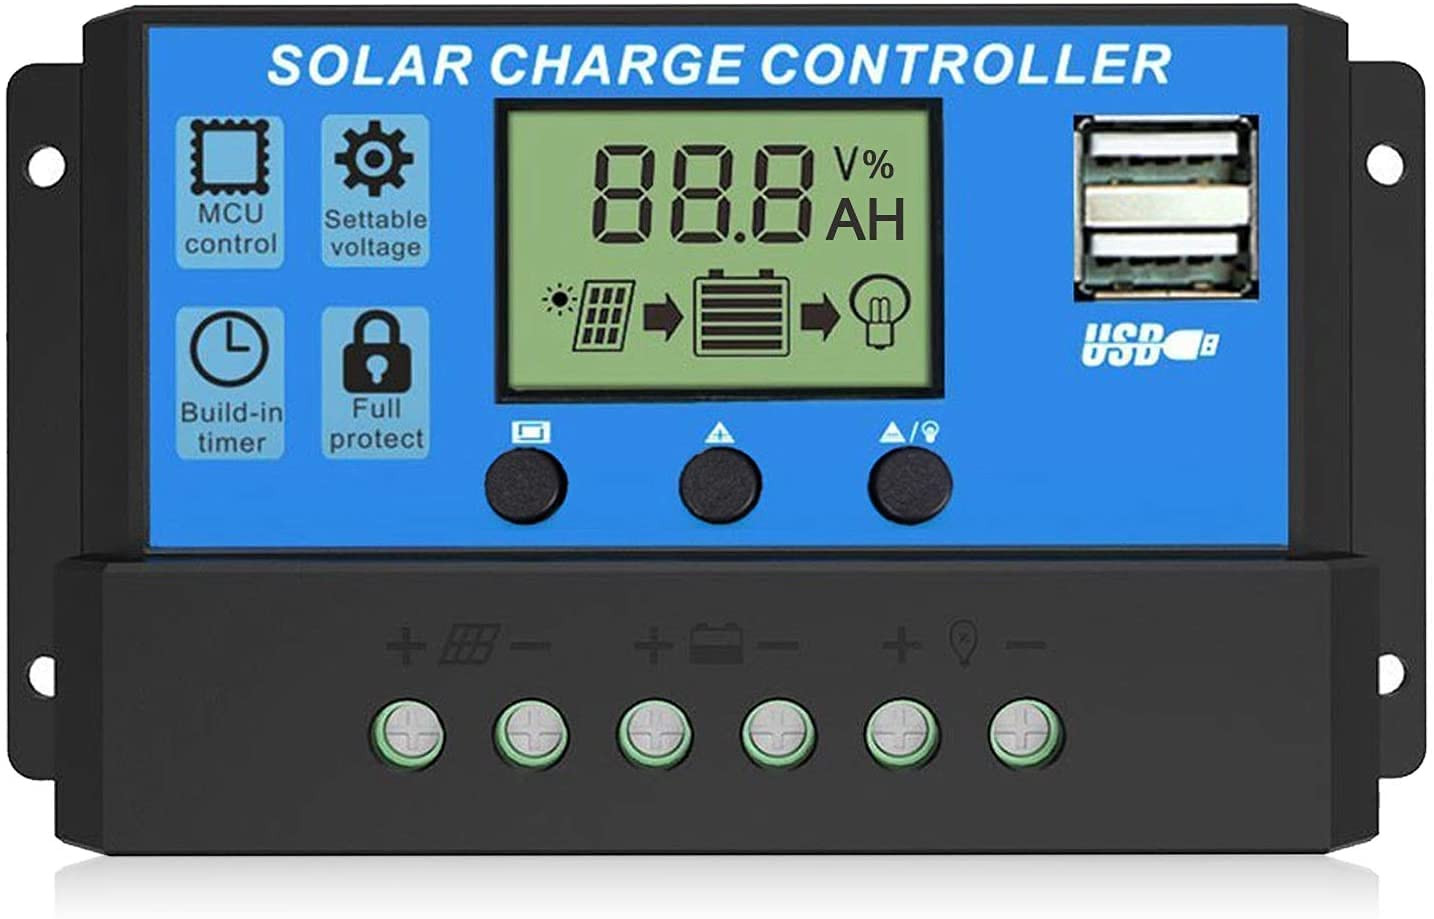 Techtonics Solar Charge Controller 10A - 12v/24v Intelligent Battery charger, 10amp Control charging for Lead Acid & Lithium Battery with USB Port and LCD Display (10A)